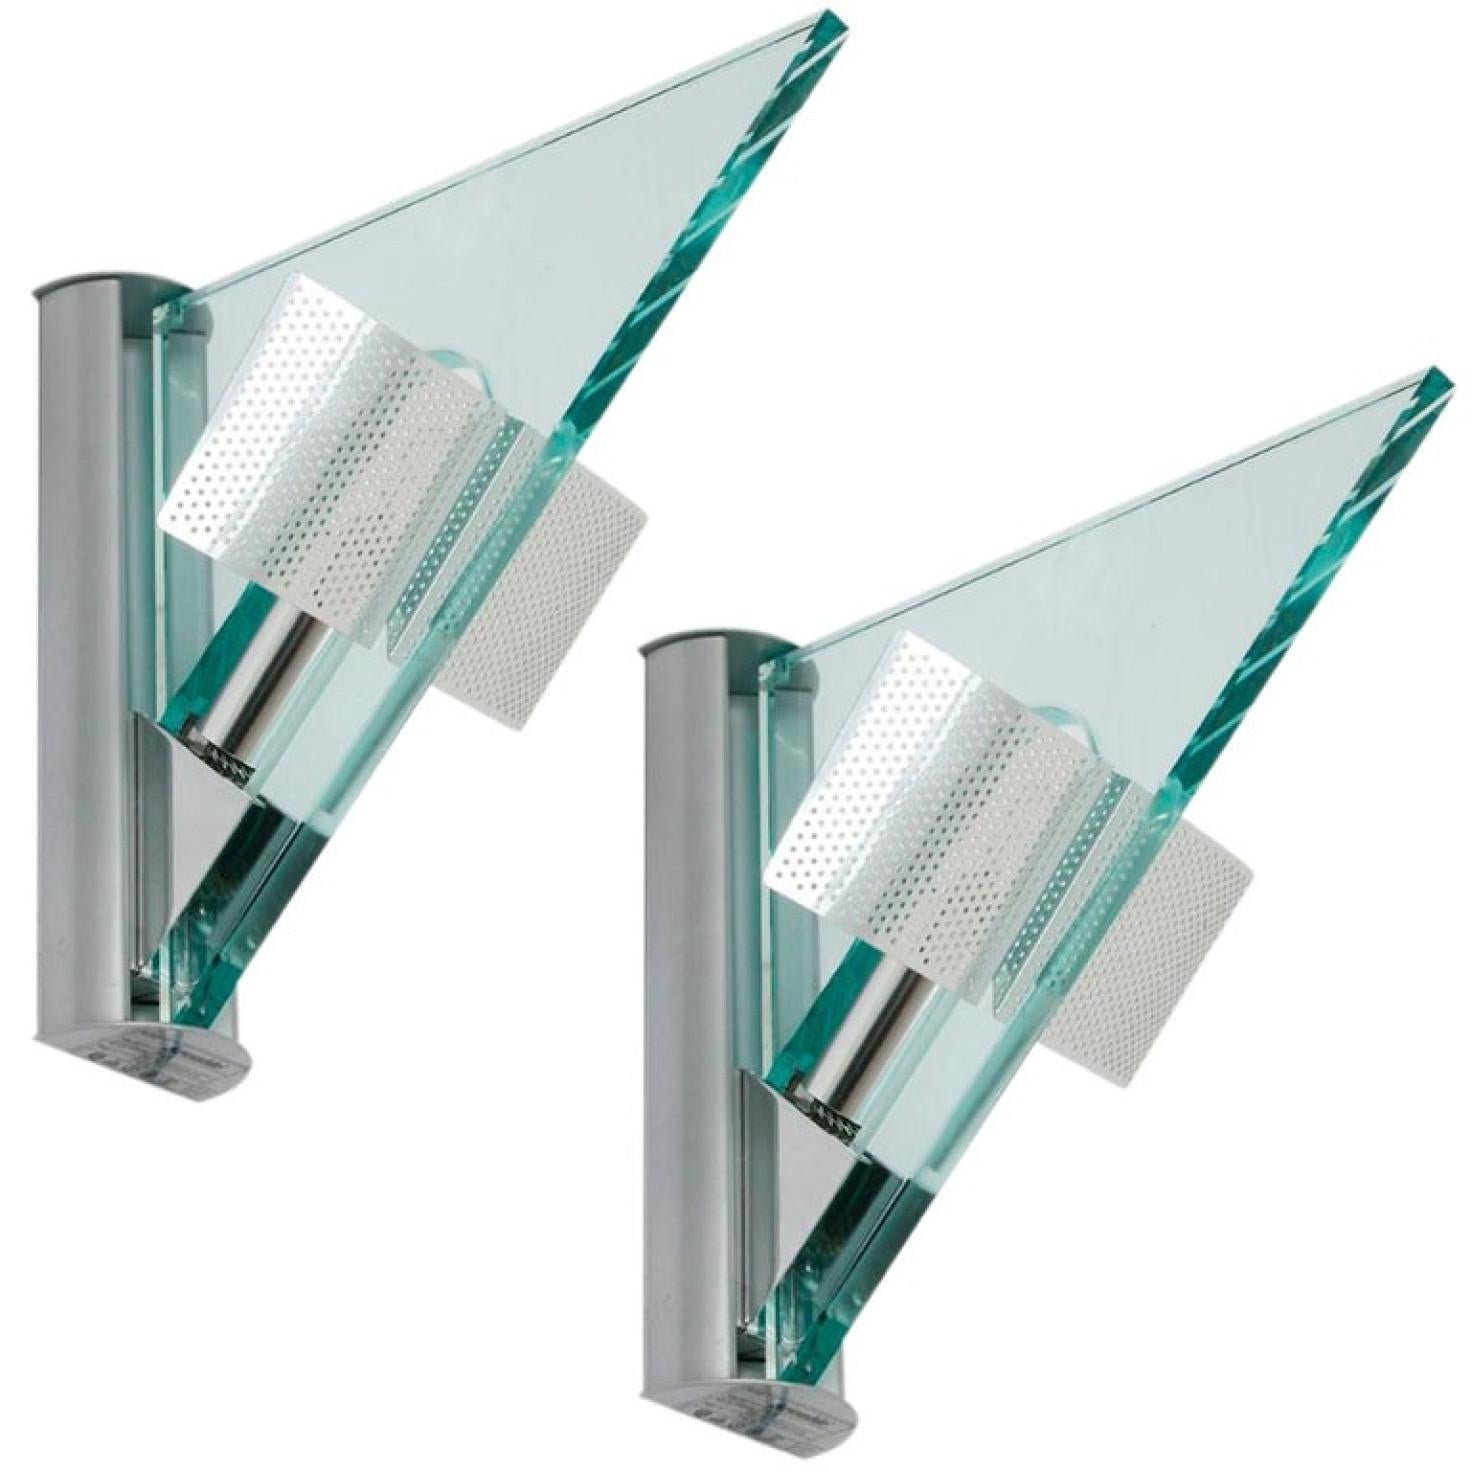 One of the Ten Glass Aluminium Triangle Shaped Wall Lights, Artemide, 1984 In Good Condition For Sale In Rijssen, NL